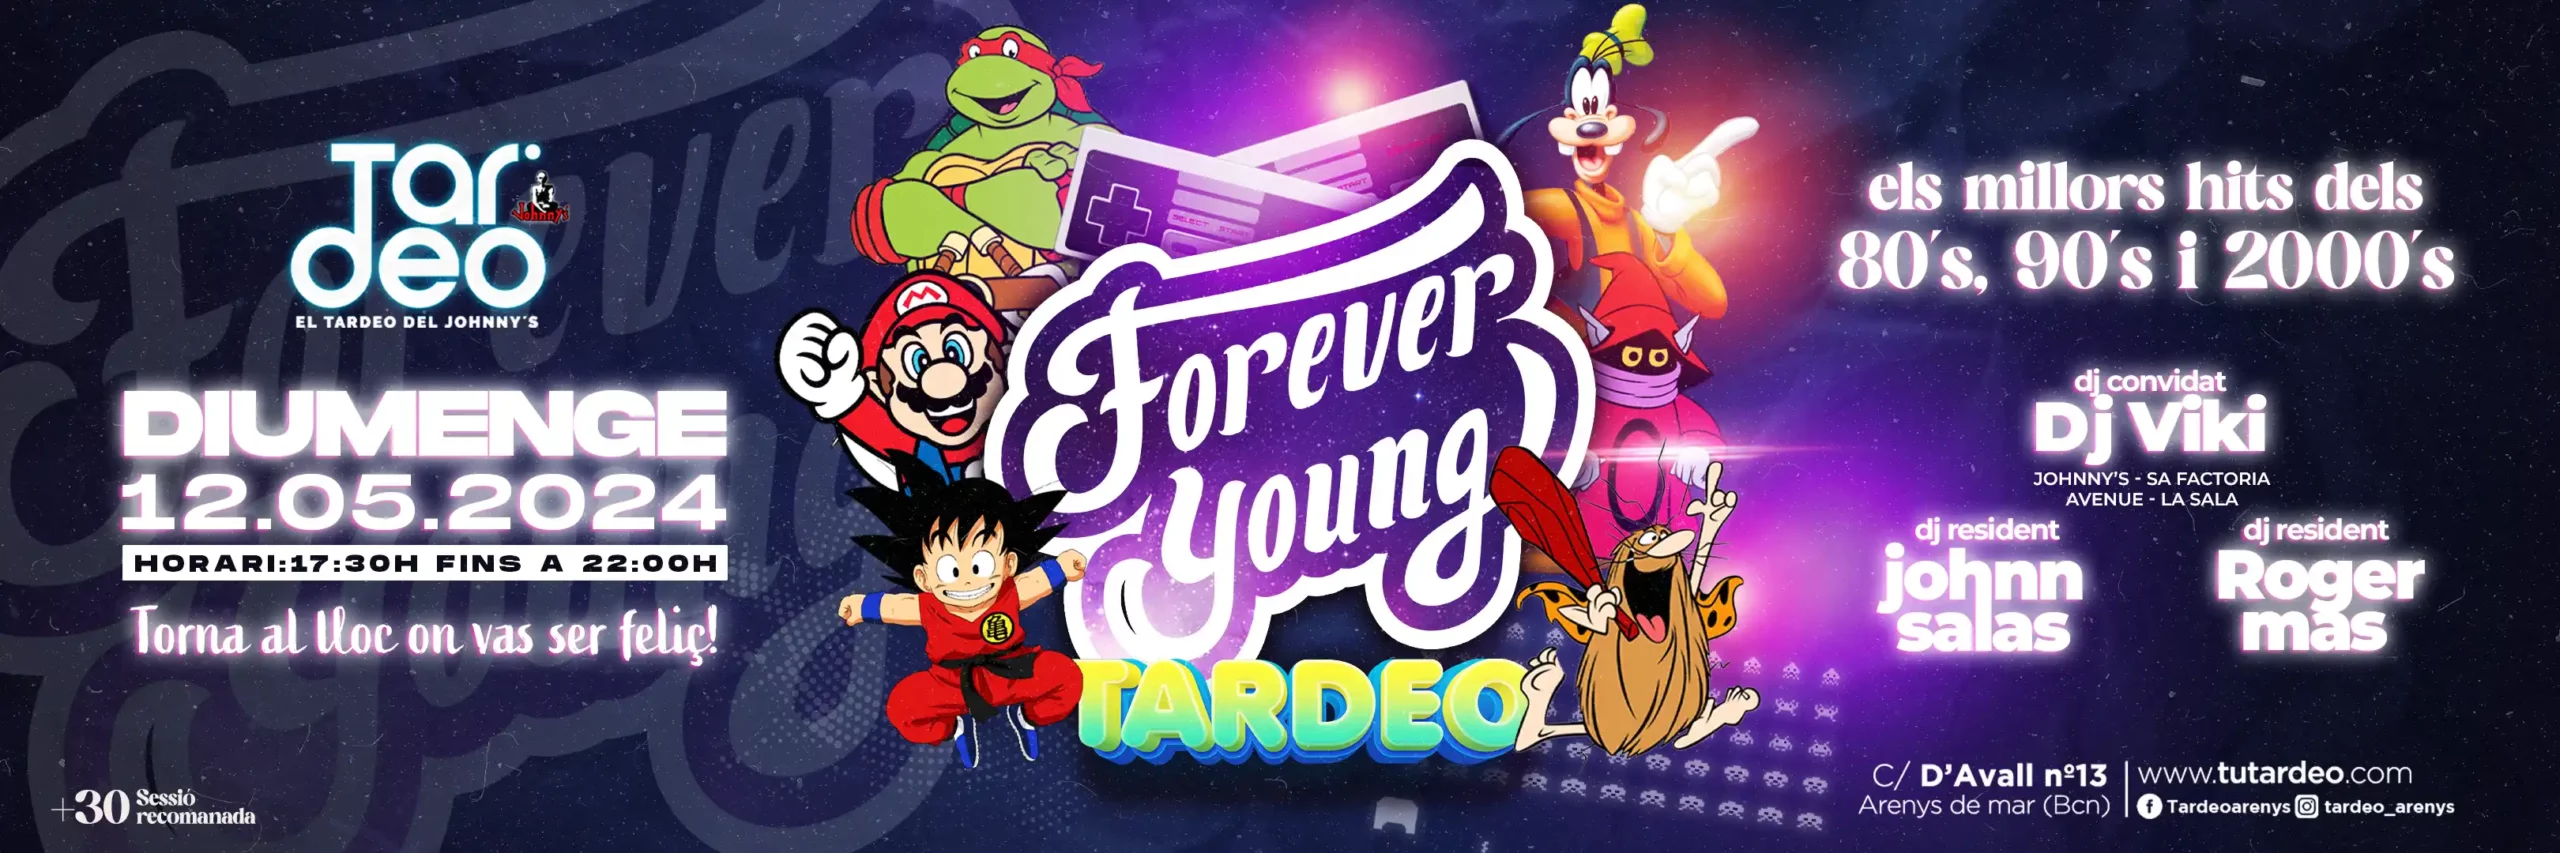 tardeo forever young johnnys